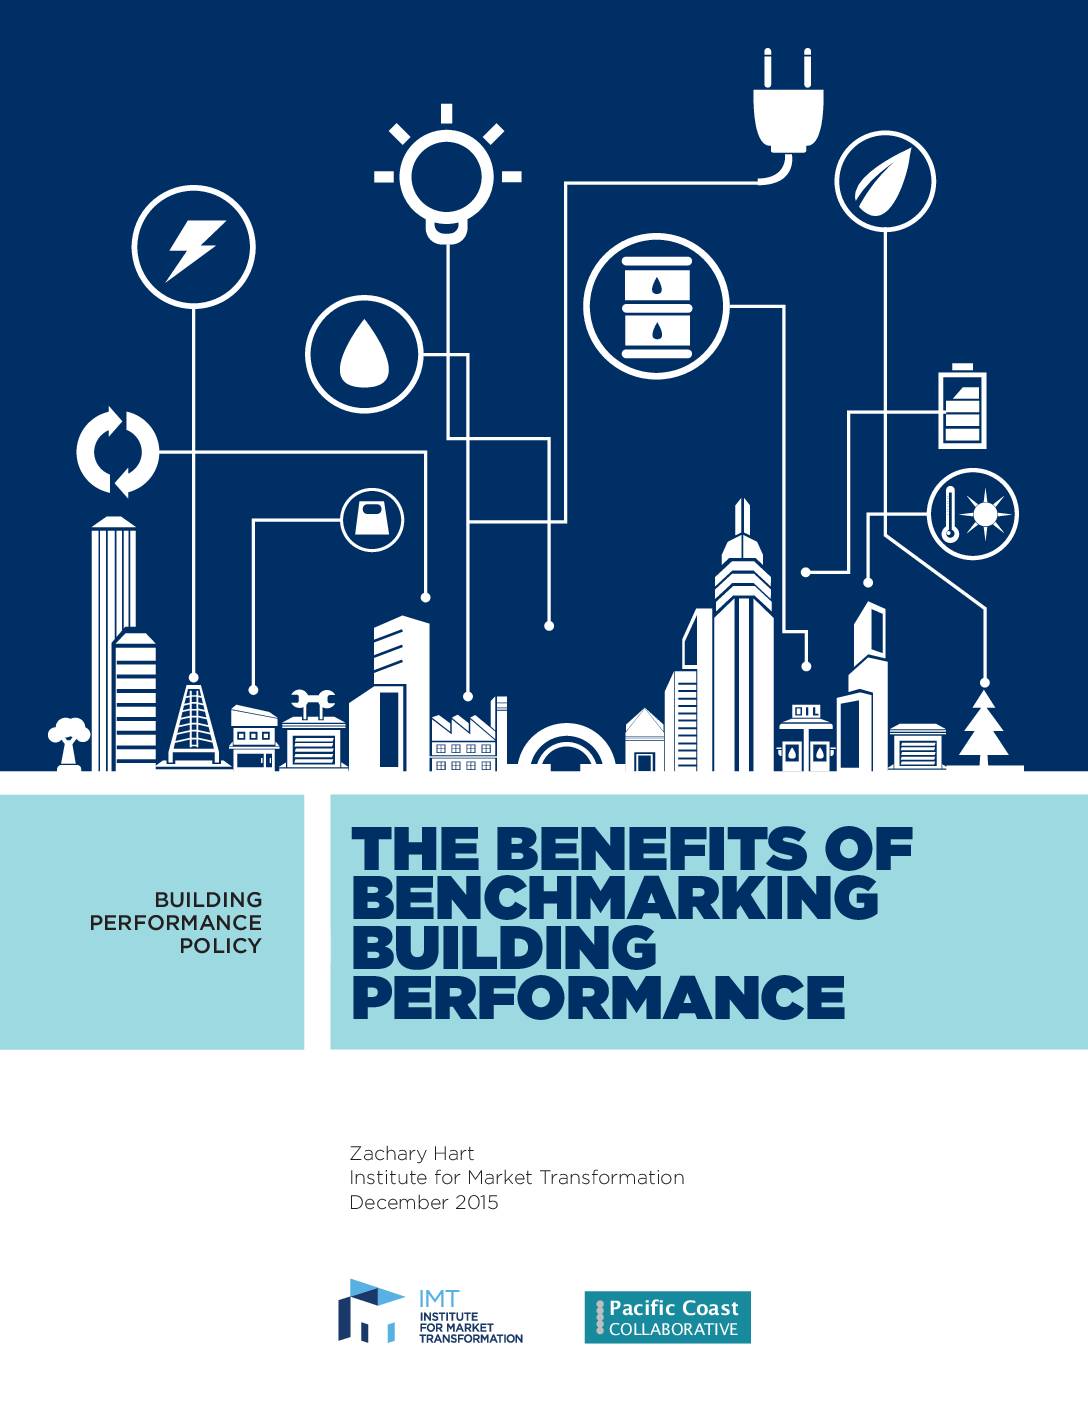 The Benefits of Benchmarking Building Performance